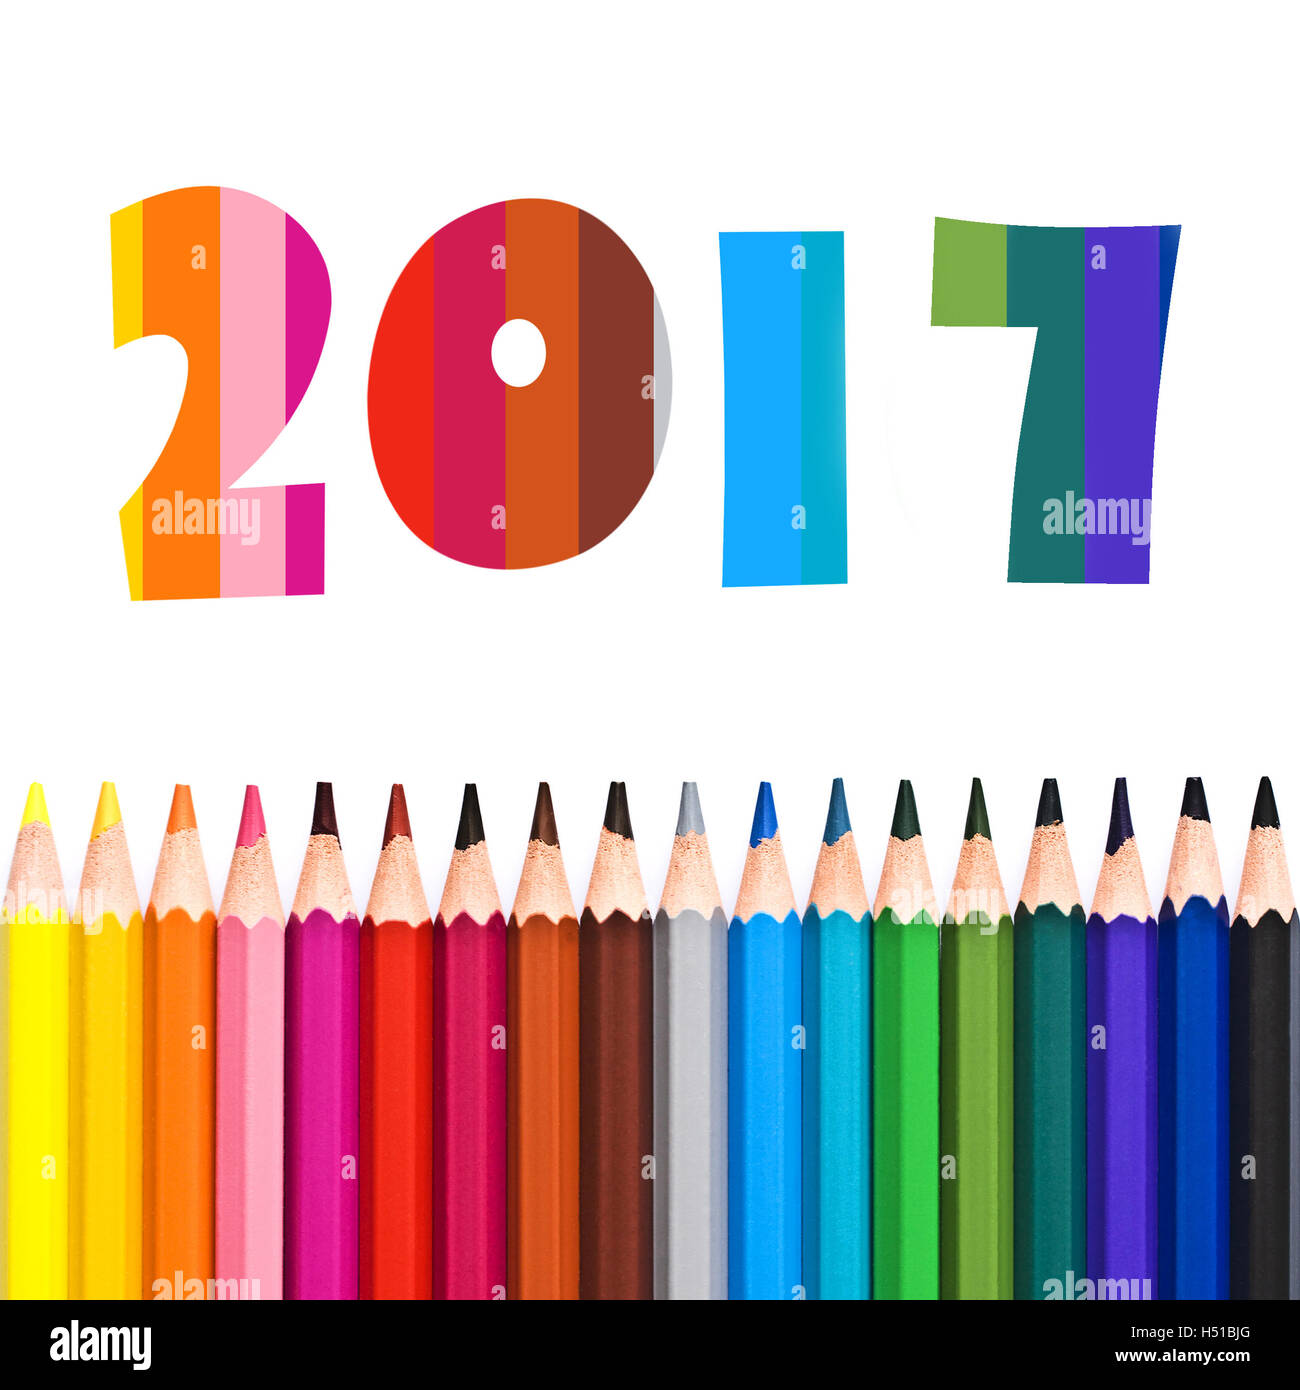 2017, row of colorful pencils isolated on white background Stock Photo